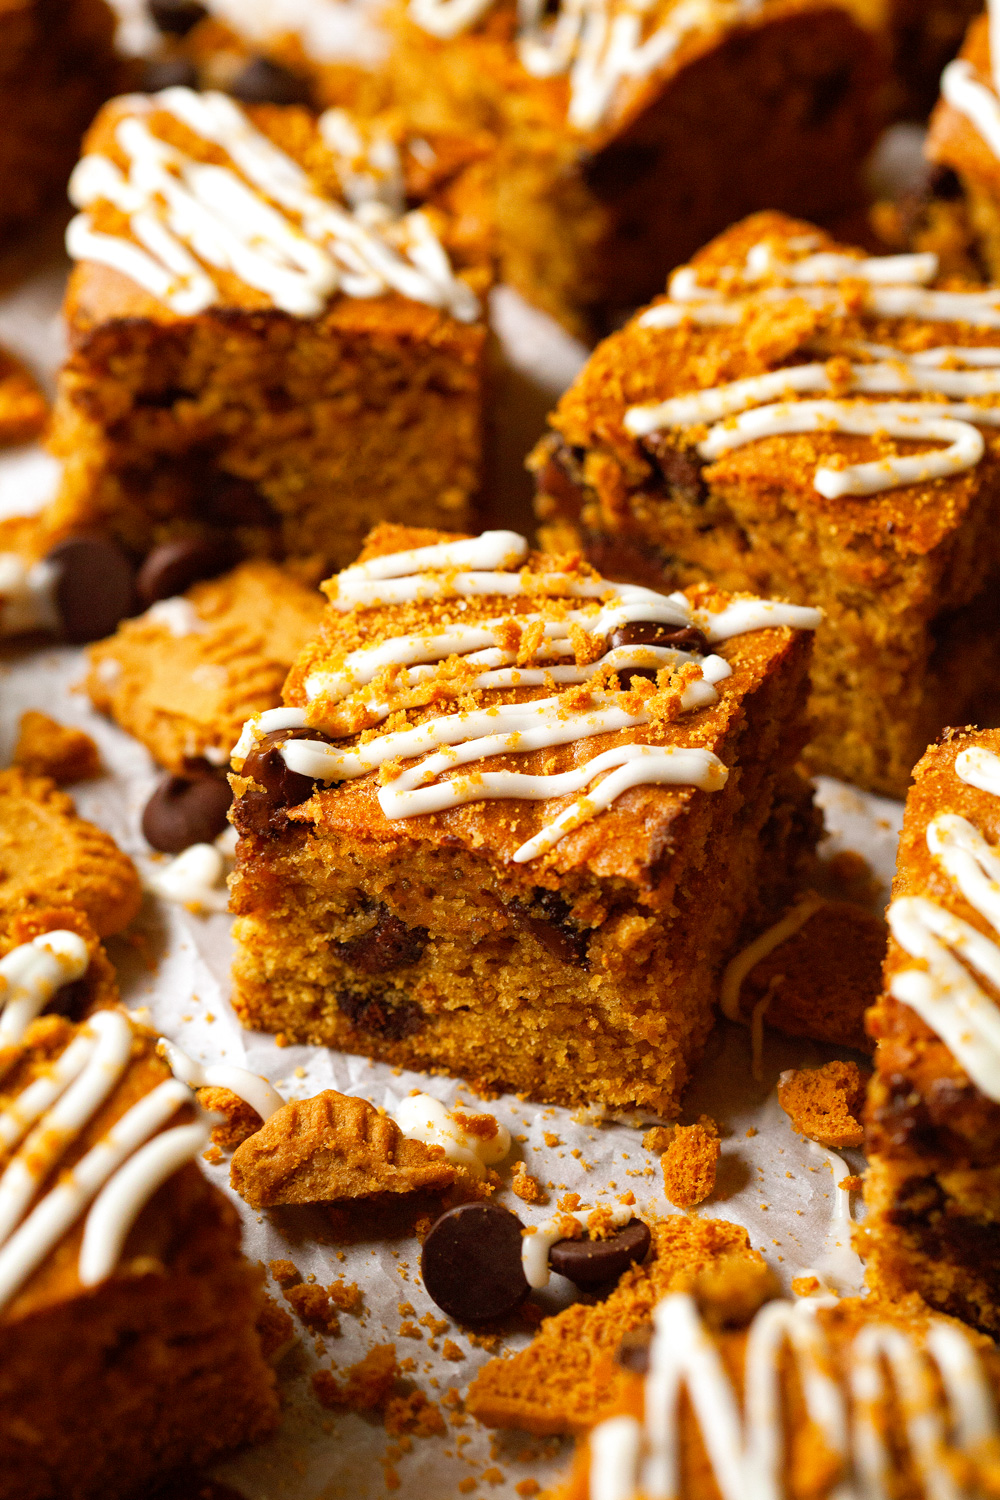 Cream Cheese Drizzled Pumpkin and Cookie Butter Bars